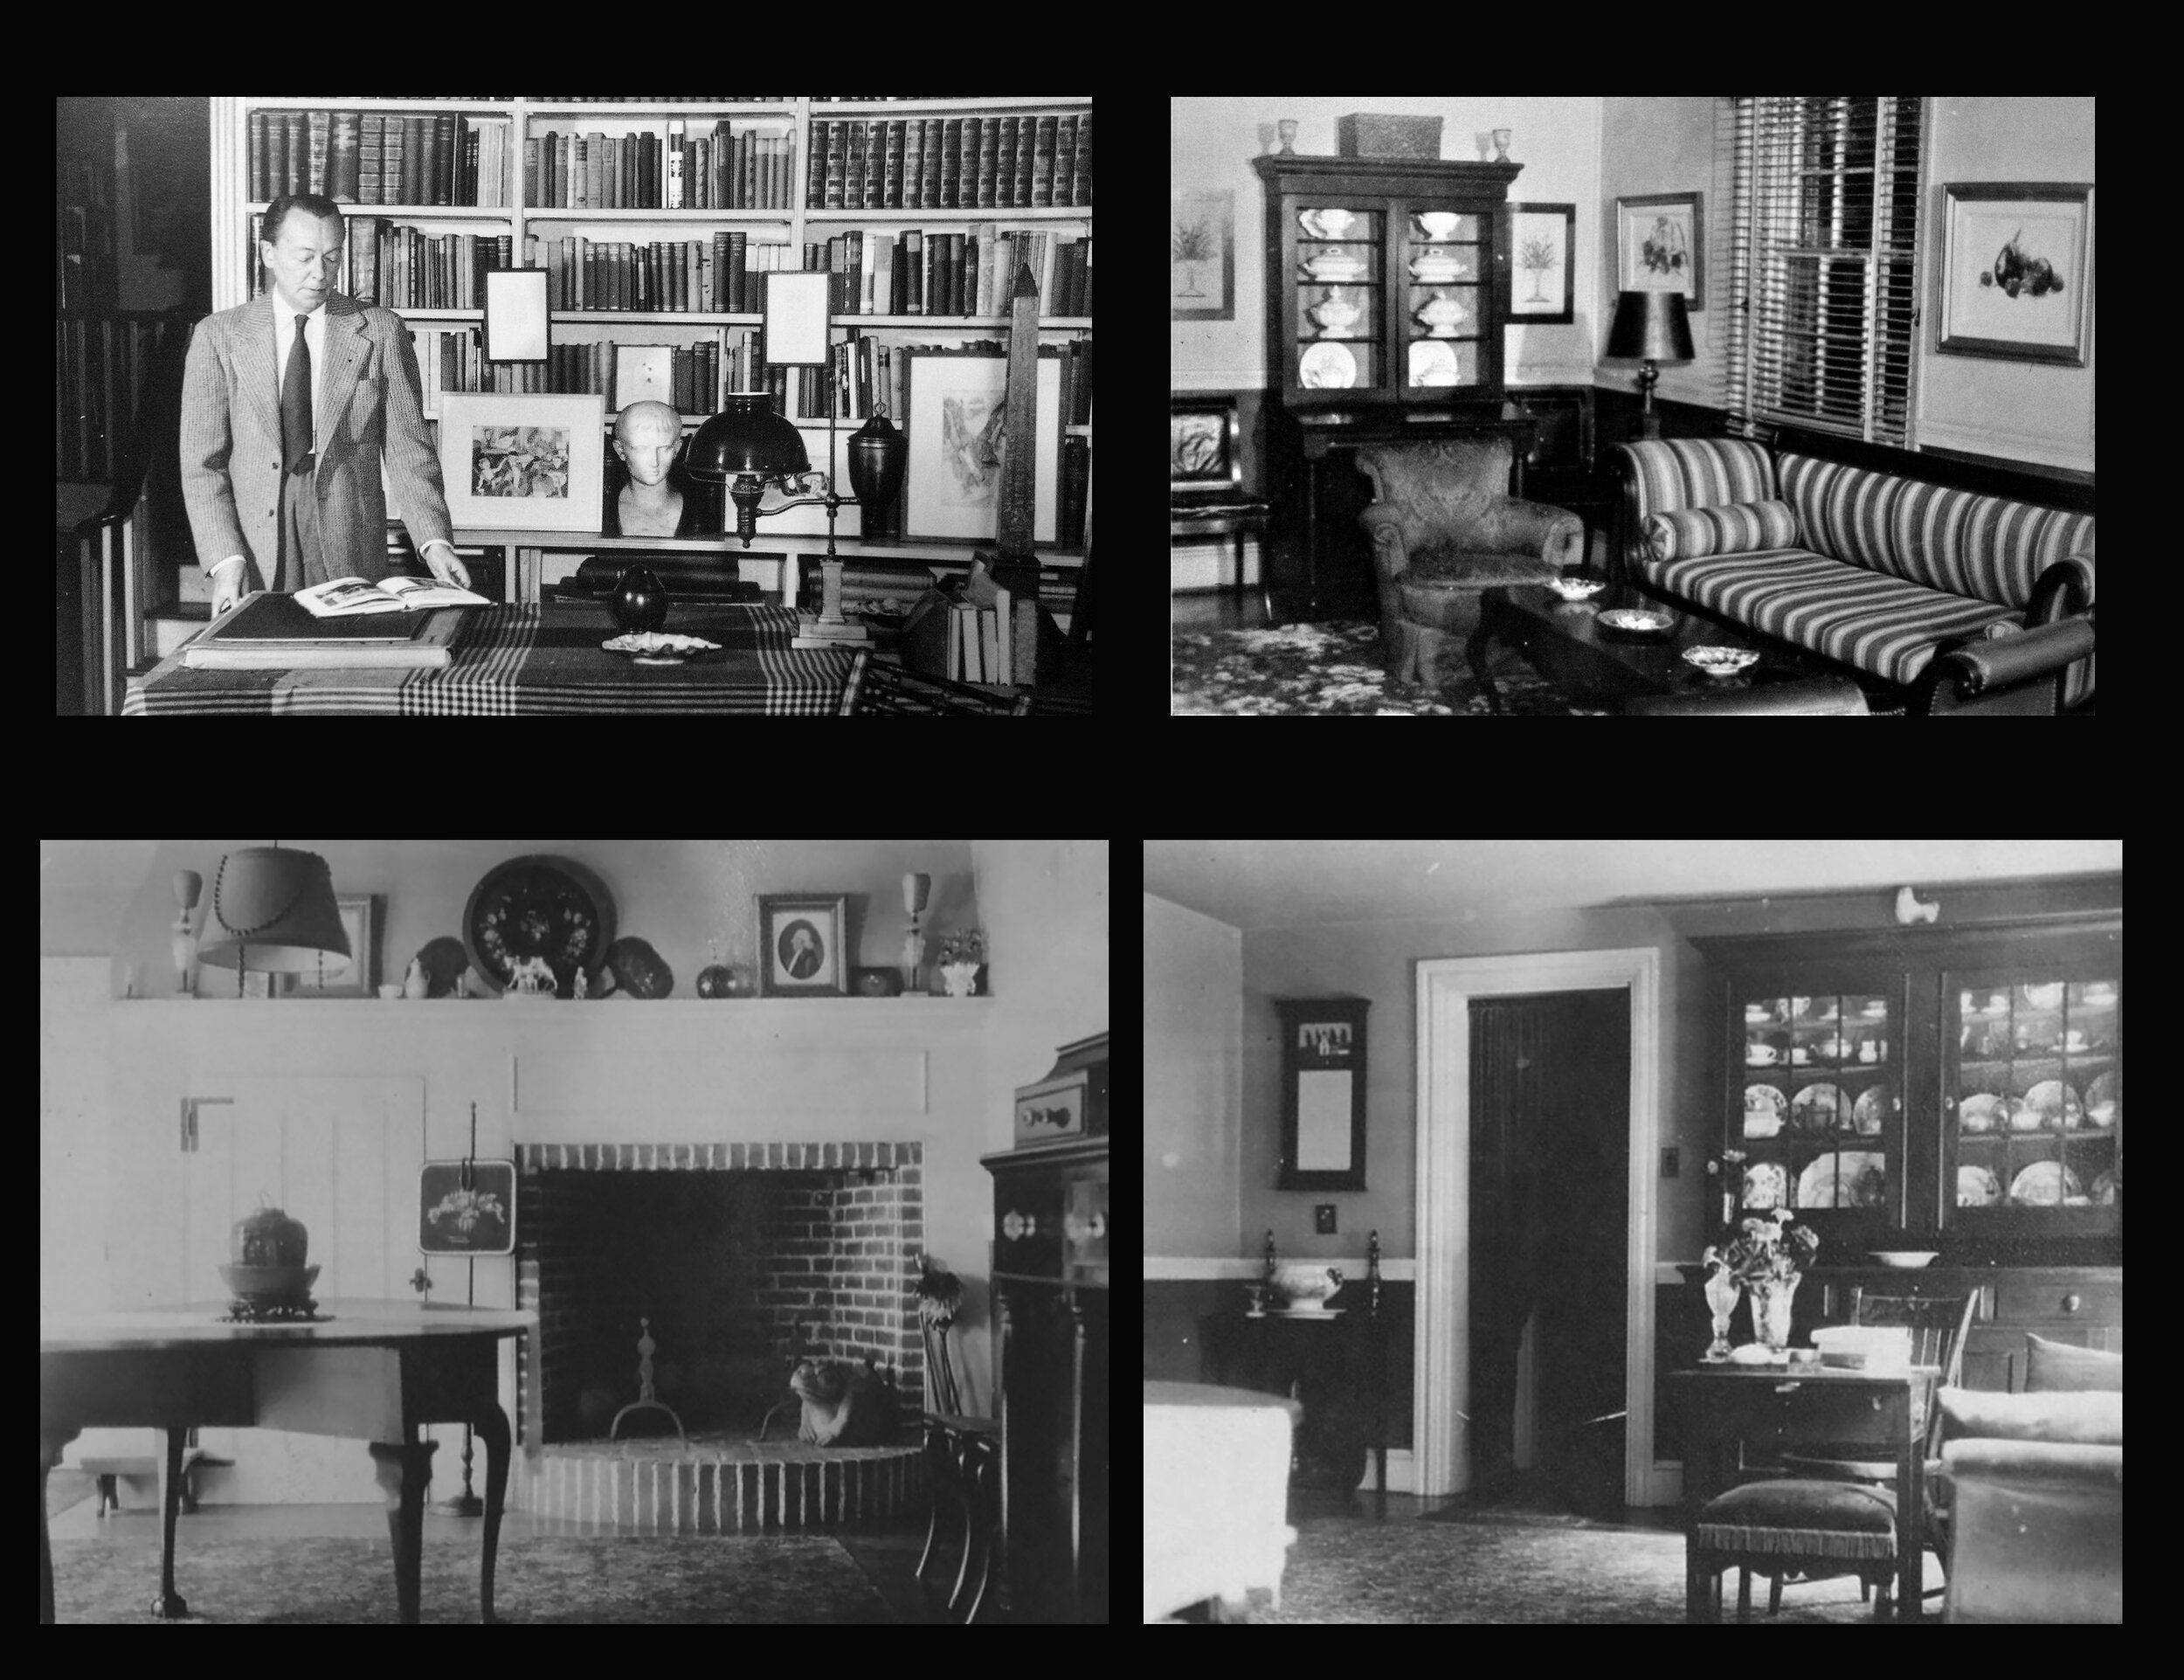   Pre &amp; Post 1917 Demuth Home:   Richard W. C. Weyand collection of Charles Demuth. Yale Collection of American Literature, Beinecke Rare Book and Manuscript Library. Photographer(s) Unknown.  